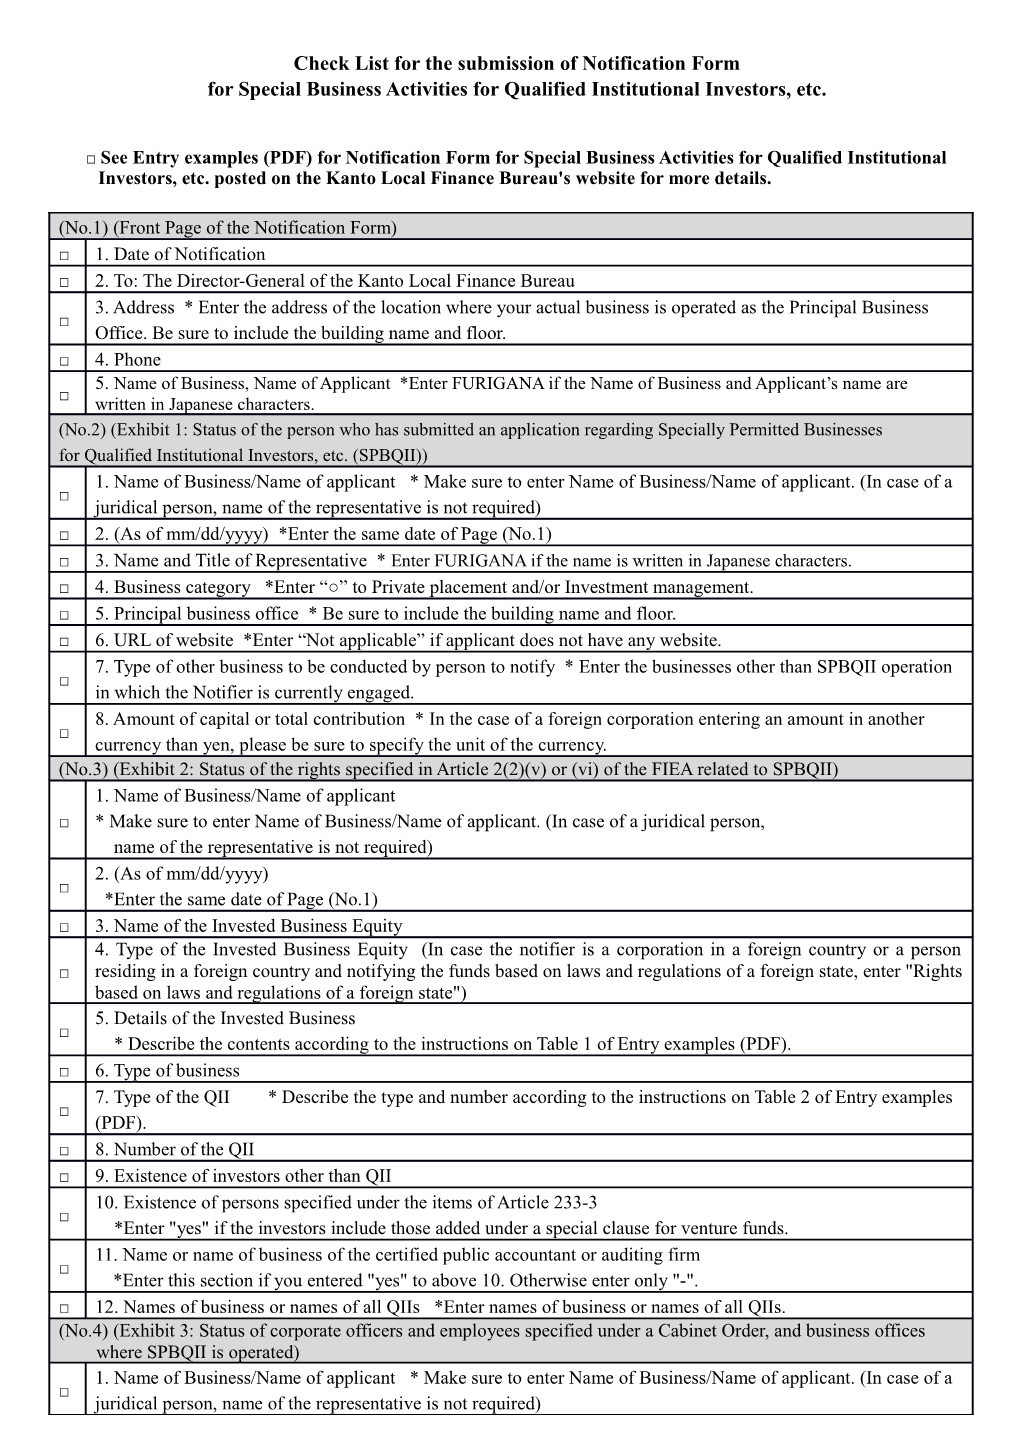 Check List for the Submission of Notification Form